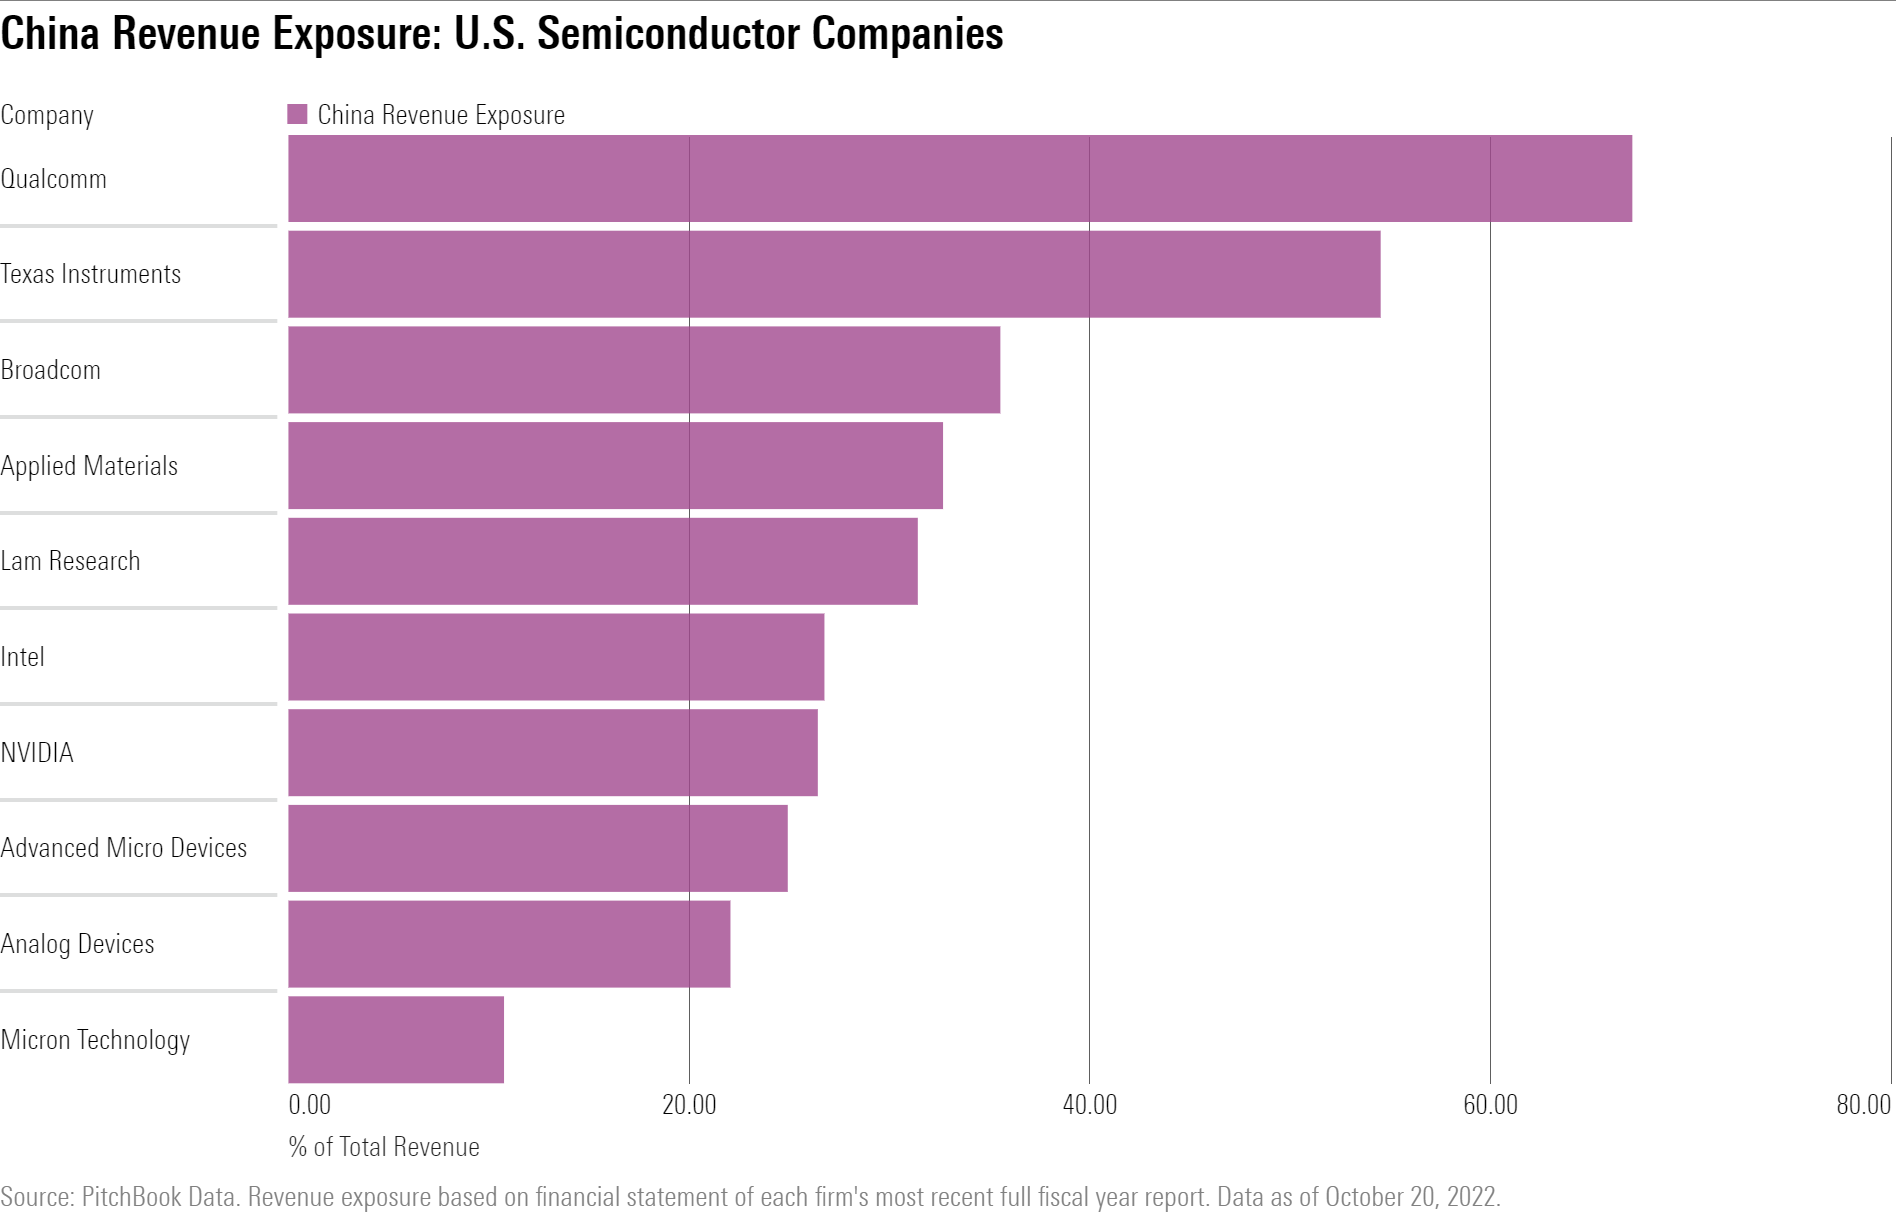 Horizontal bar chart showing revenue exposure of US-listed semiconductor companies to China.